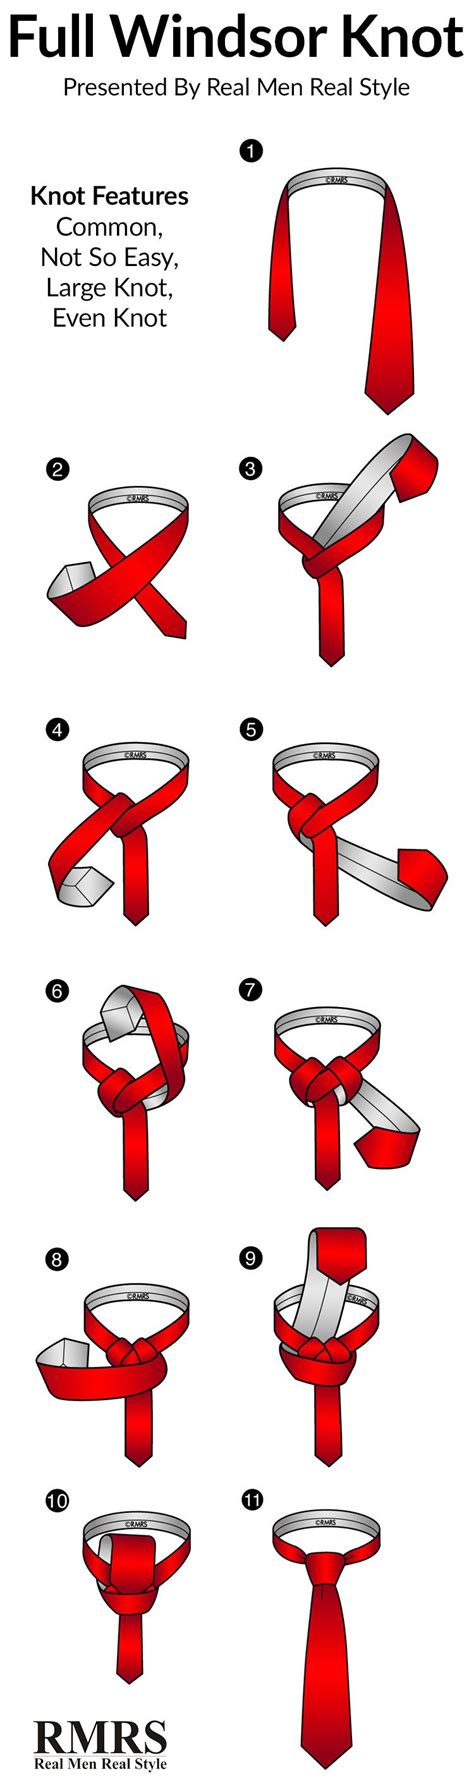 tie  full windsor knot infographic